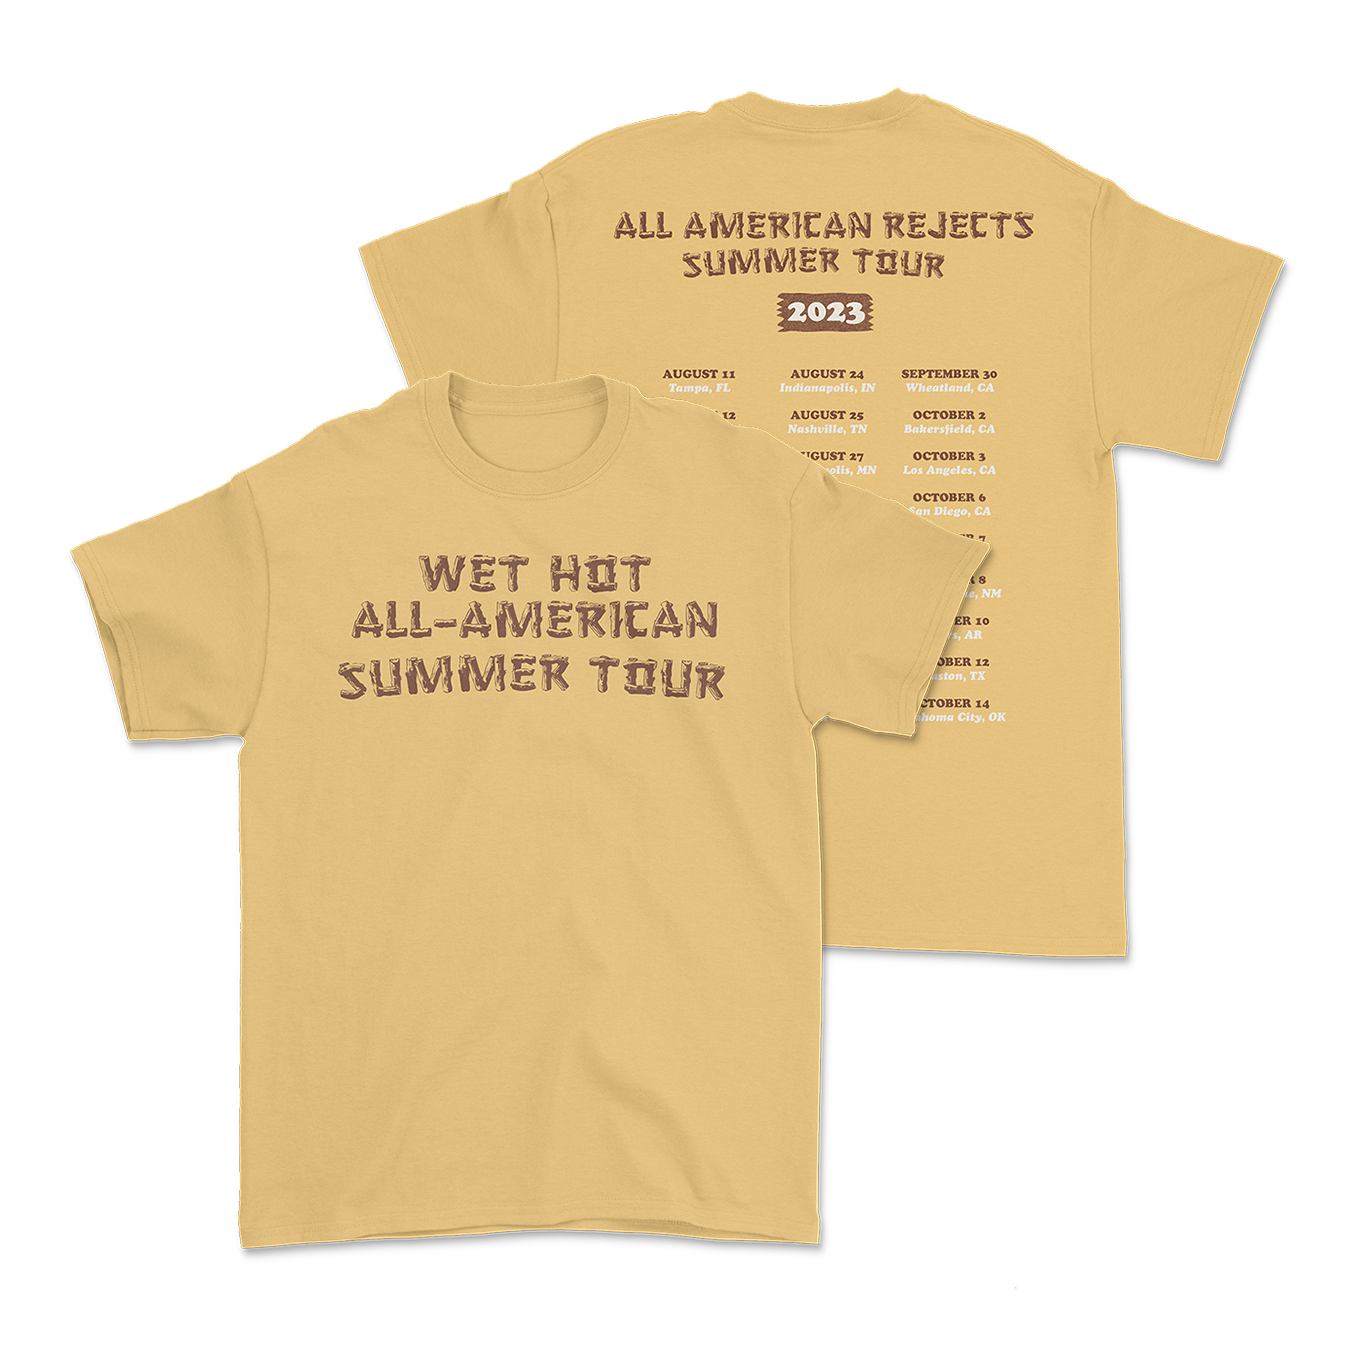 All American Rejects Wet Hot All-American Summer Tour Tee front and back